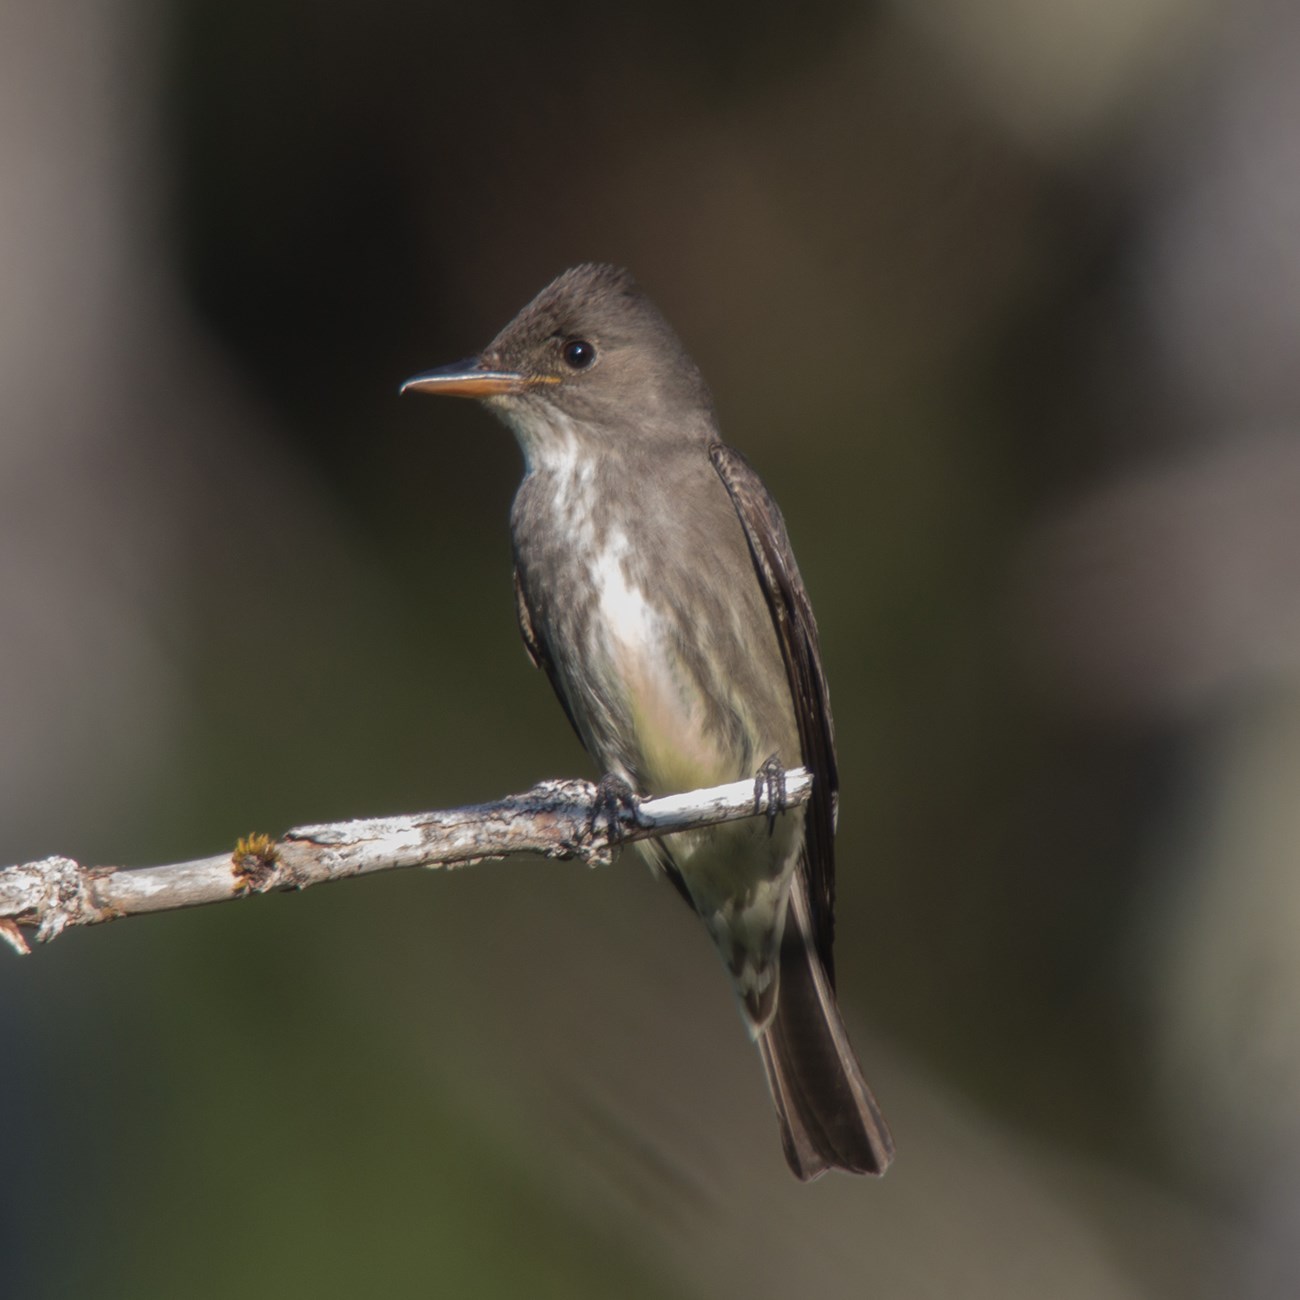 Frontal view of an Olive sided flycatcher bird perched on a brach